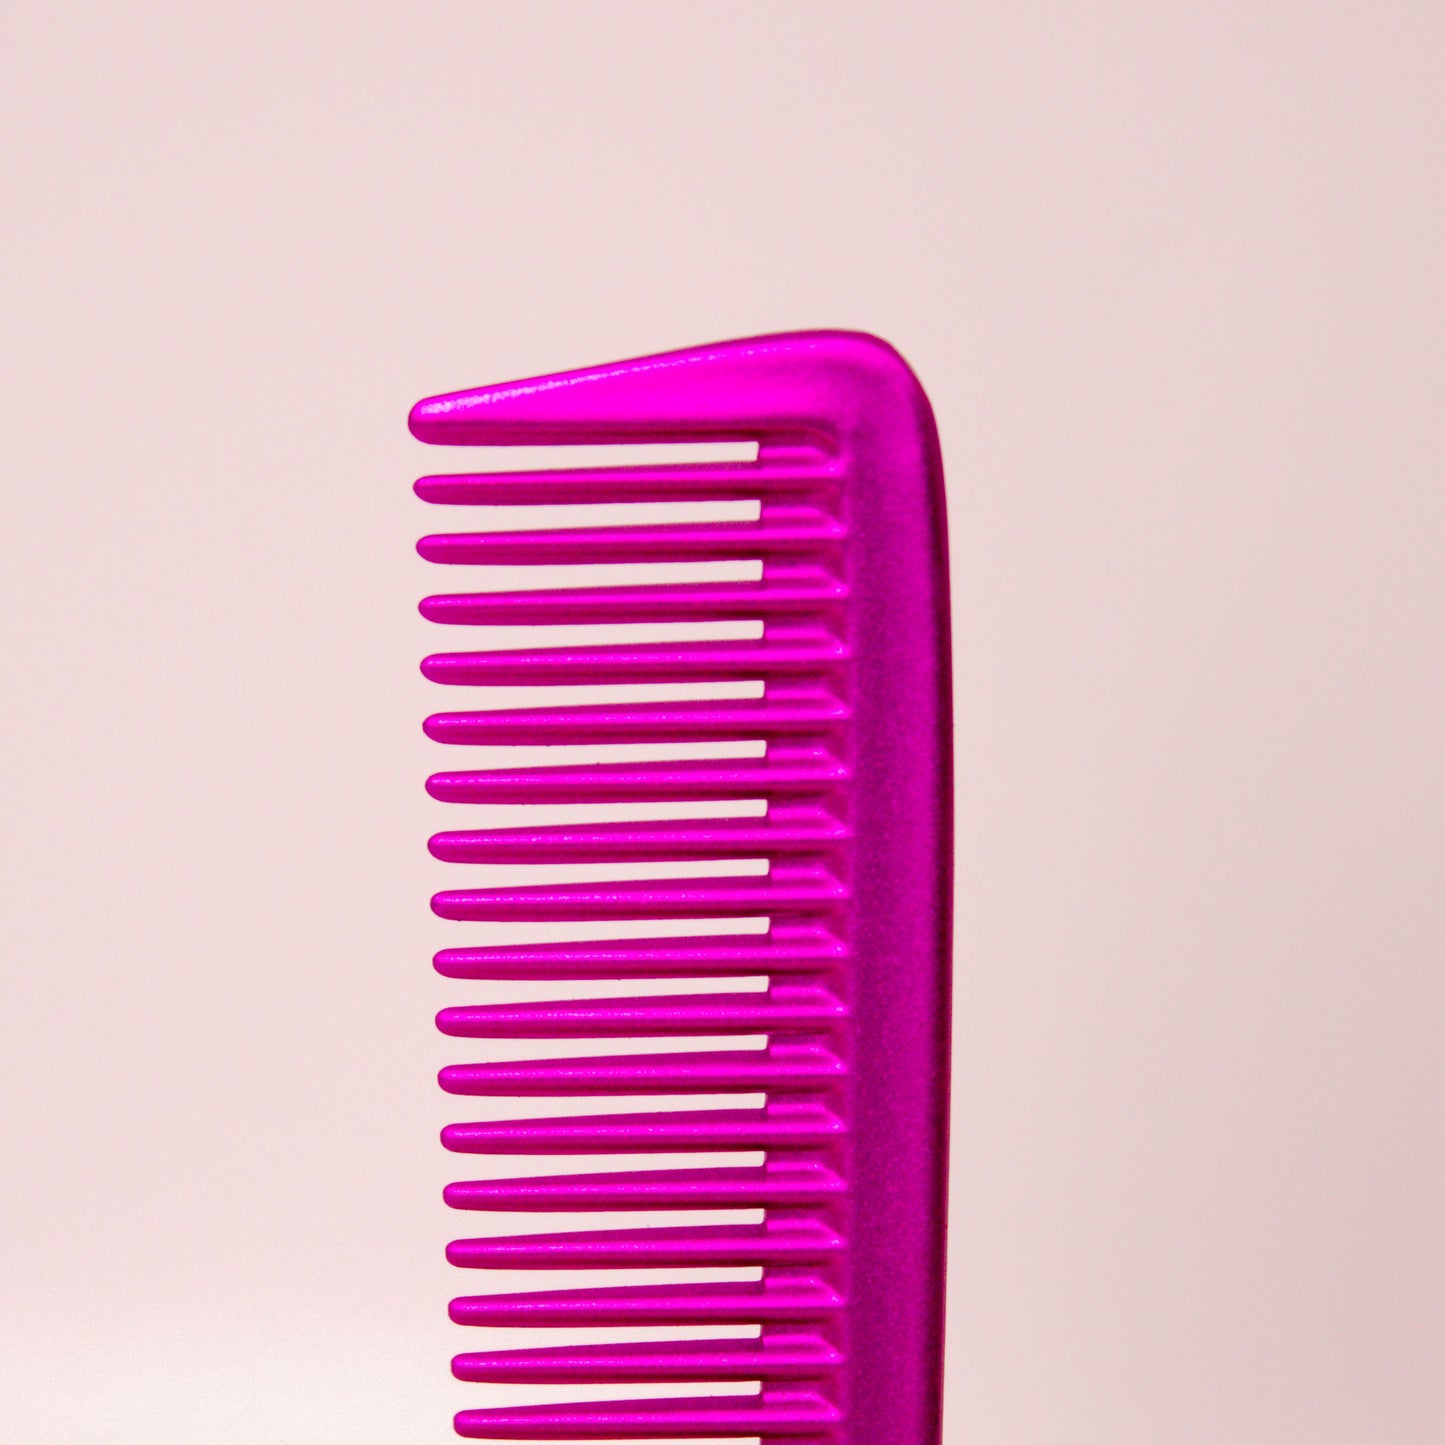 Pegasus MICOLOR 615, 7in Hard Rubber Clipper Comb, Handmade, Seamless, Smooth Edges, Anti Static, Heat and Chemically Resistant, Portable Pocket Purse Dresser Comb | Peines de goma dura - Pink